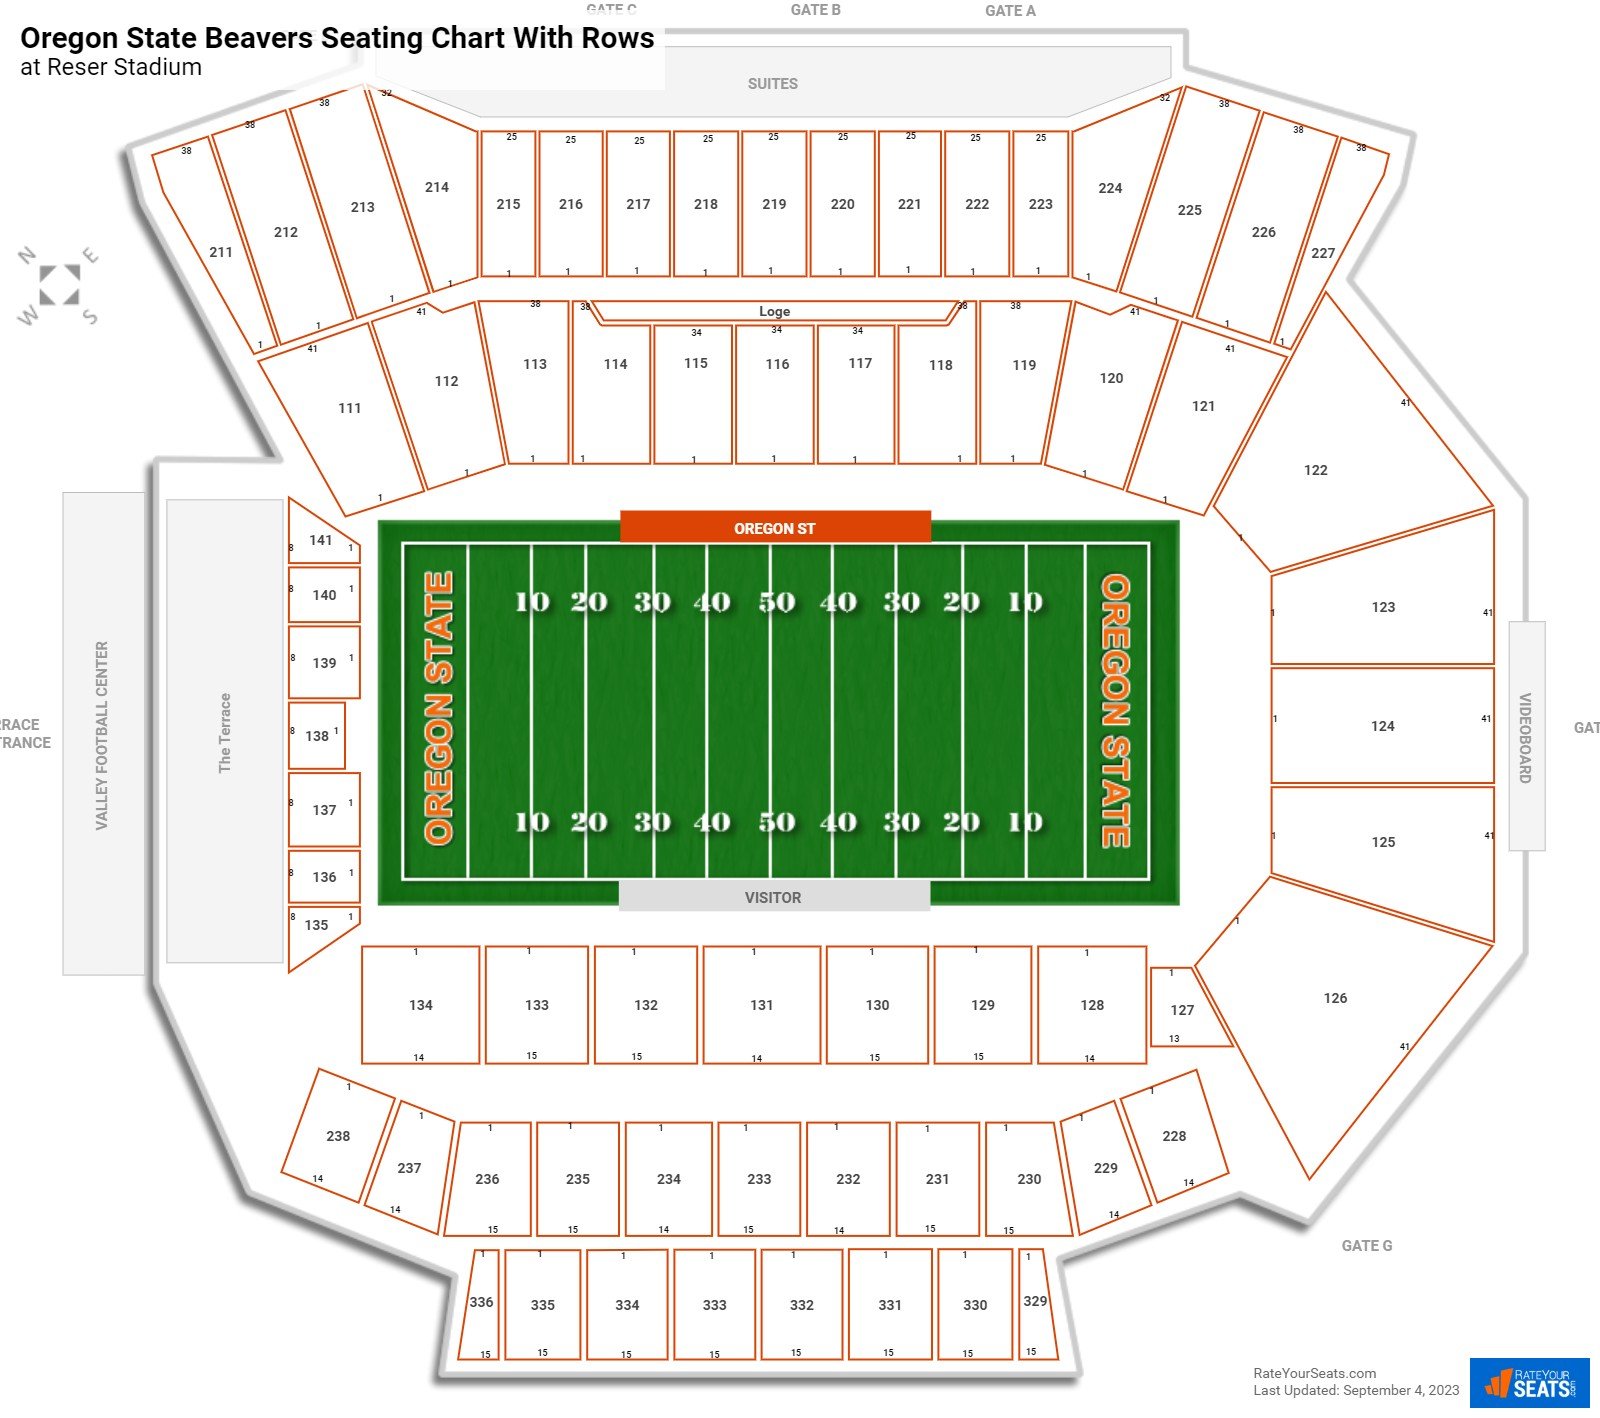 Reser Stadium seating chart with row numbers